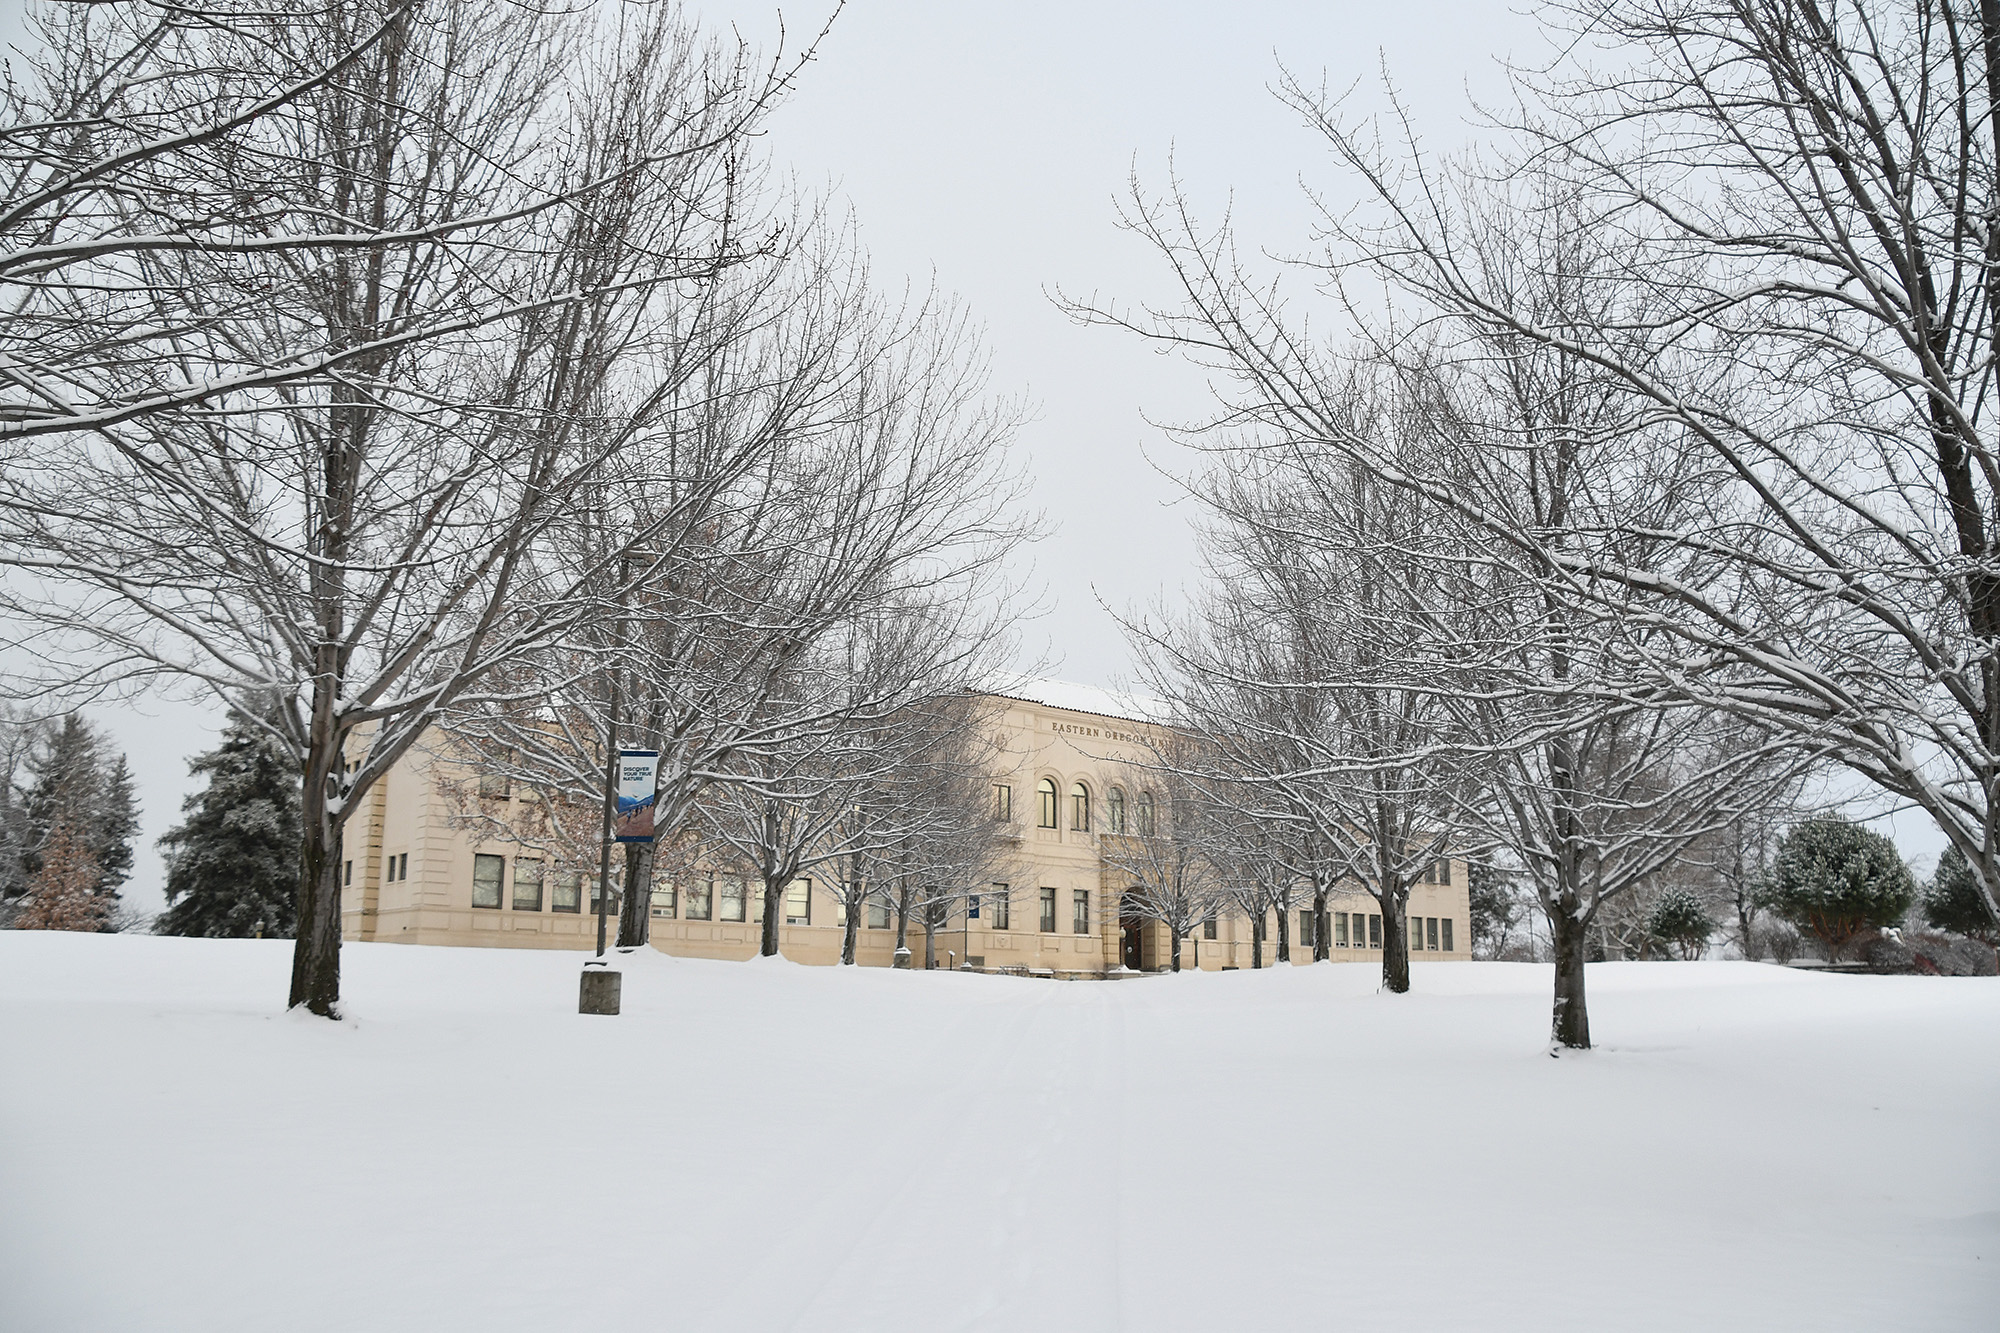 Inlow Hall in Winter